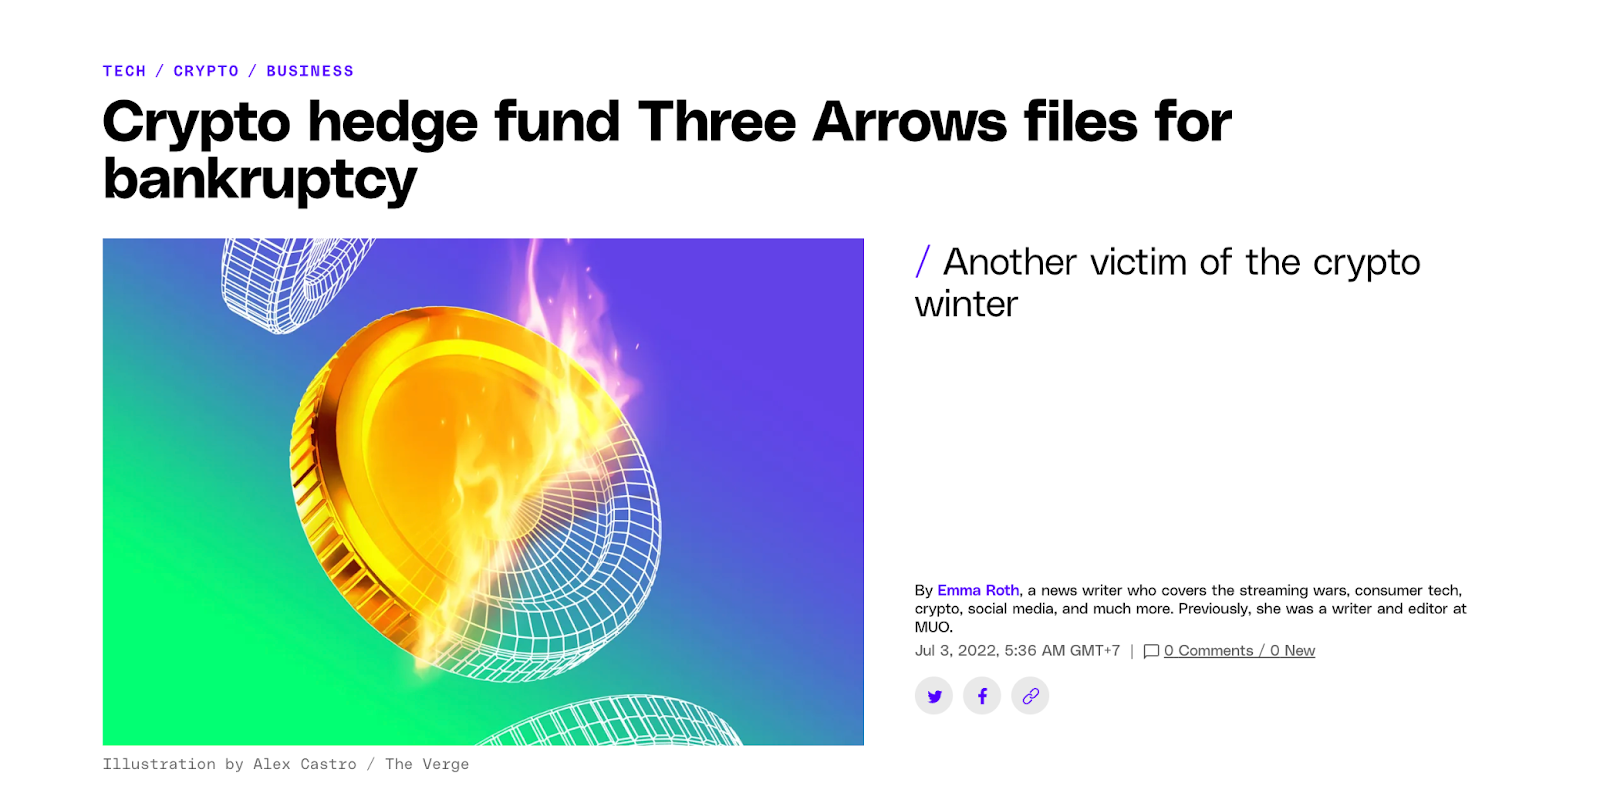 Source: <a href="https://www.theverge.com/2022/7/2/23192810/three-arrows-capital-chapter-15-bankruptcy-cryptocurrency">Crypto hedge fund Three Arrows files for bankruptcy - The Verge</a>